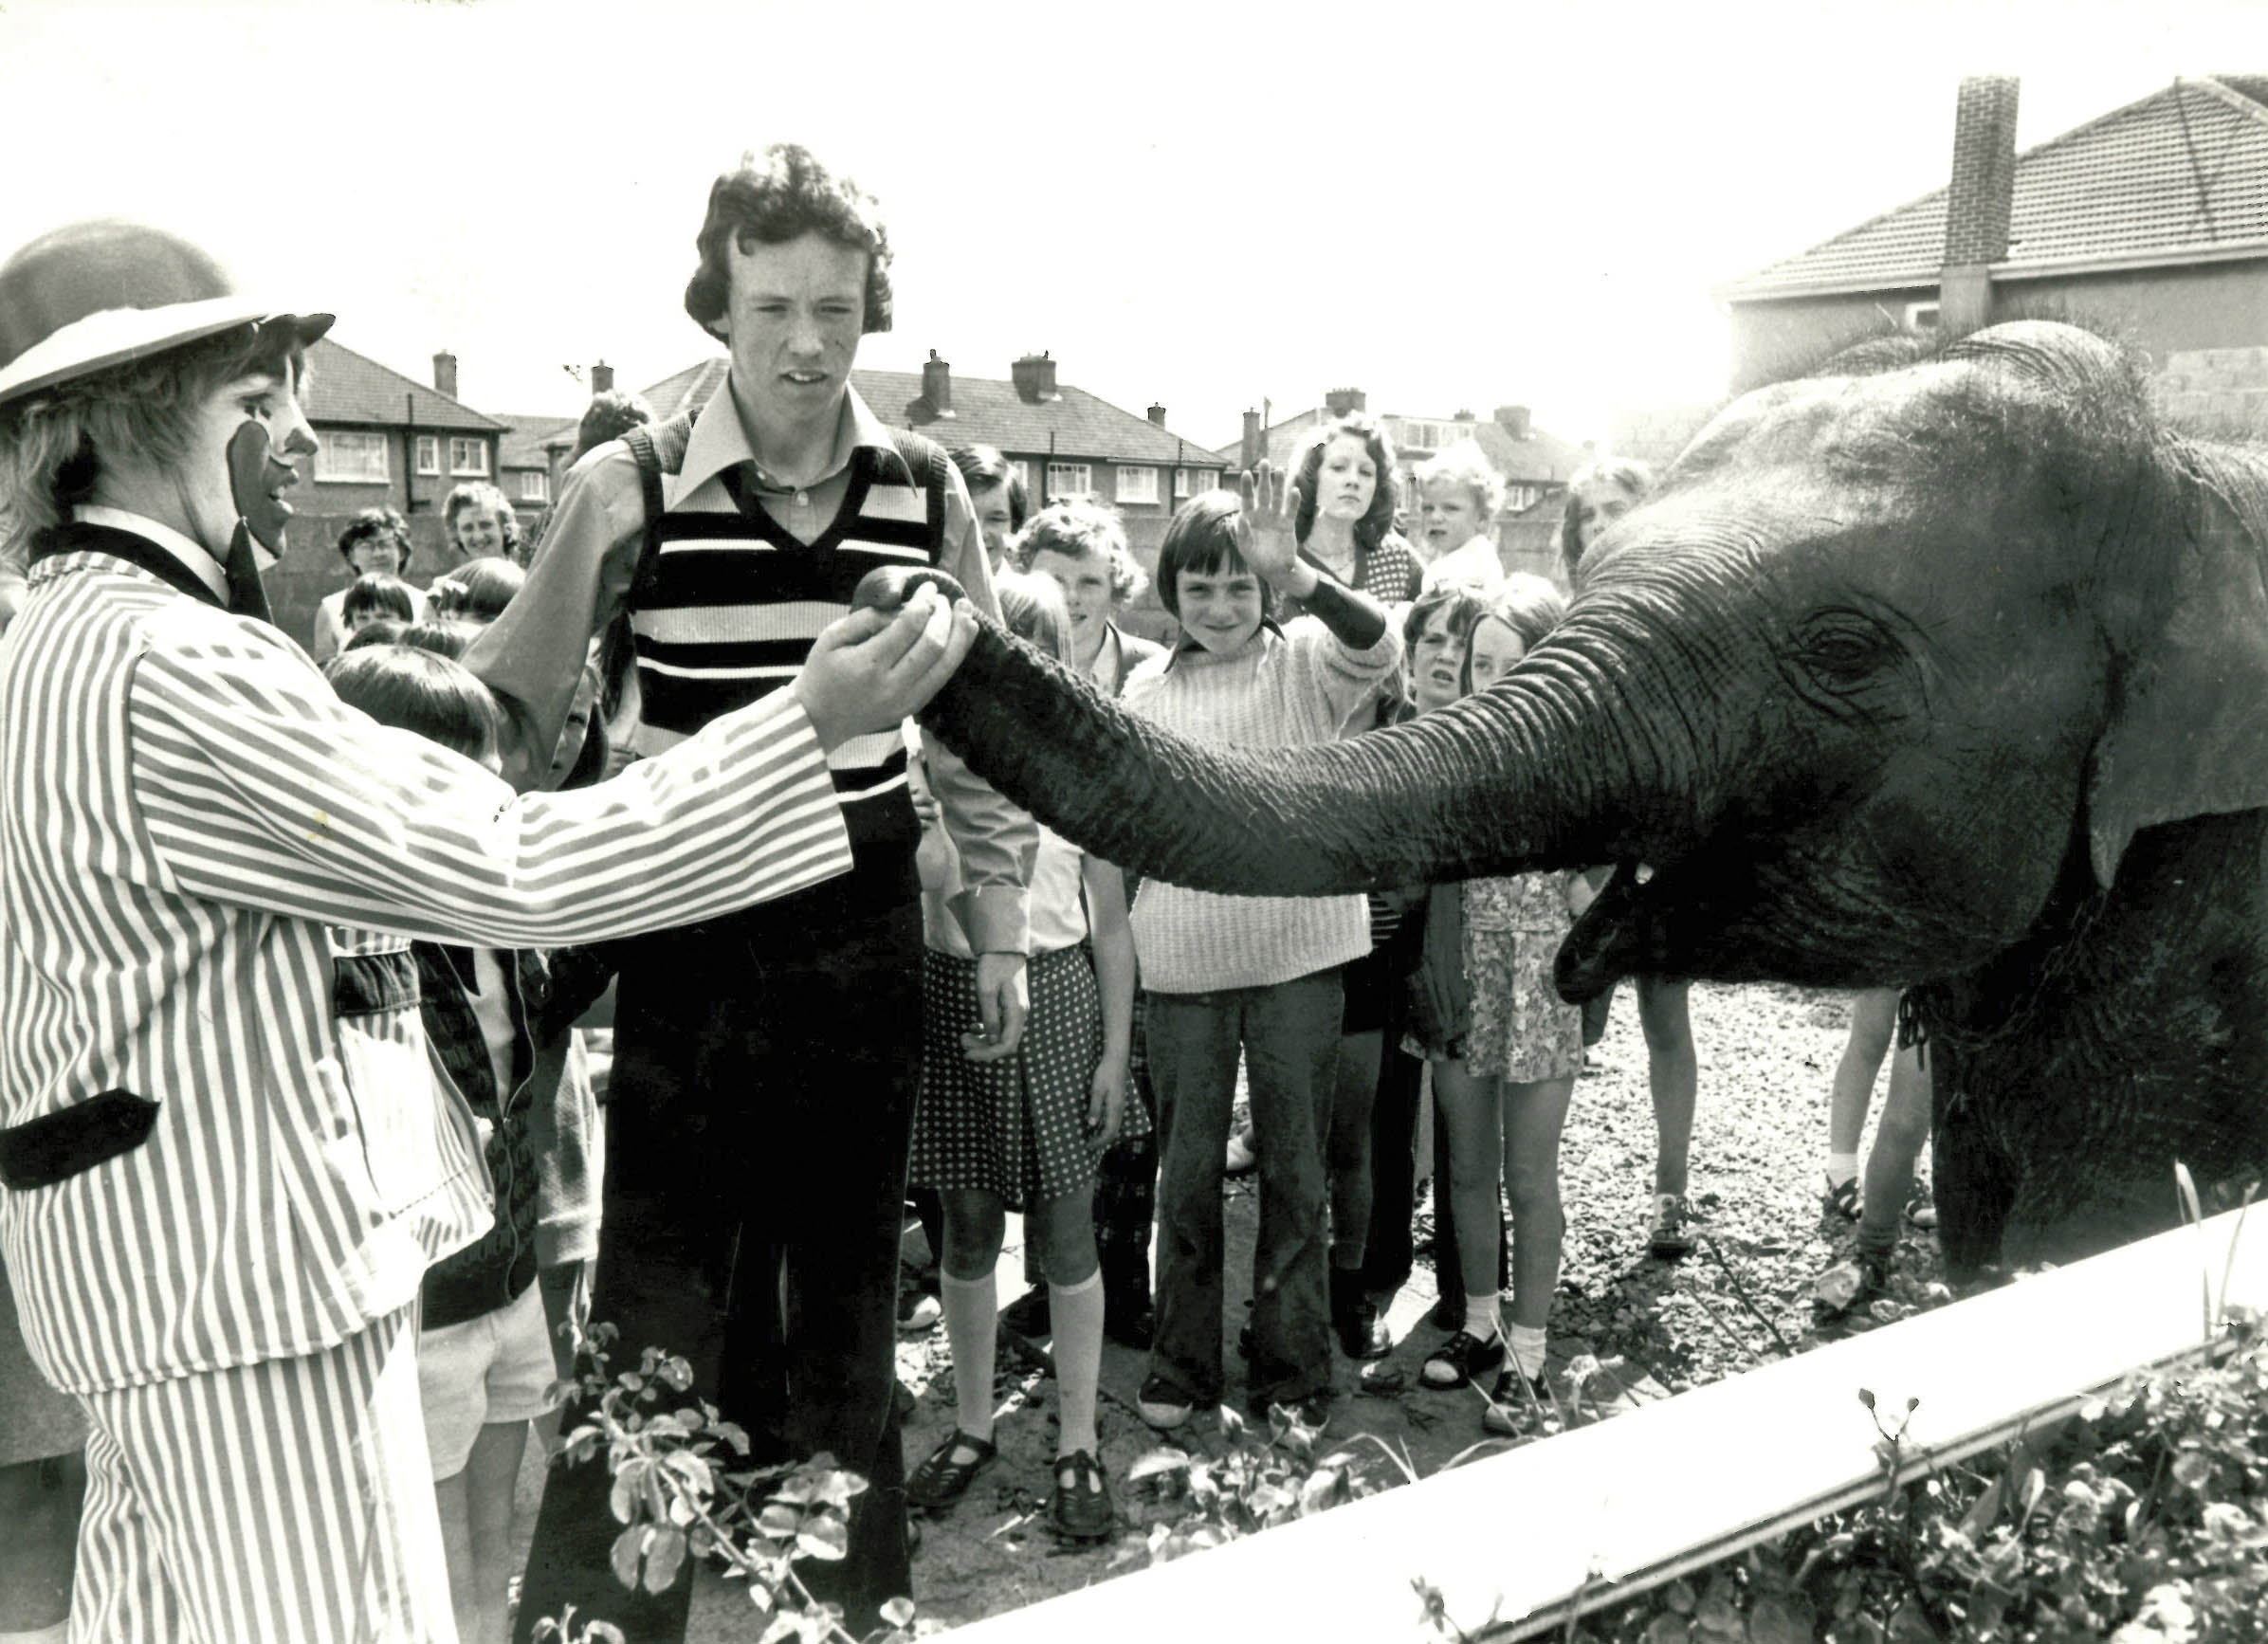 Showing early signs of a flair for publicity. John persuaded Fossetts famous circus to bring an elephant and clowns to a children’s birthday party at his parents’ home. He was 16.  